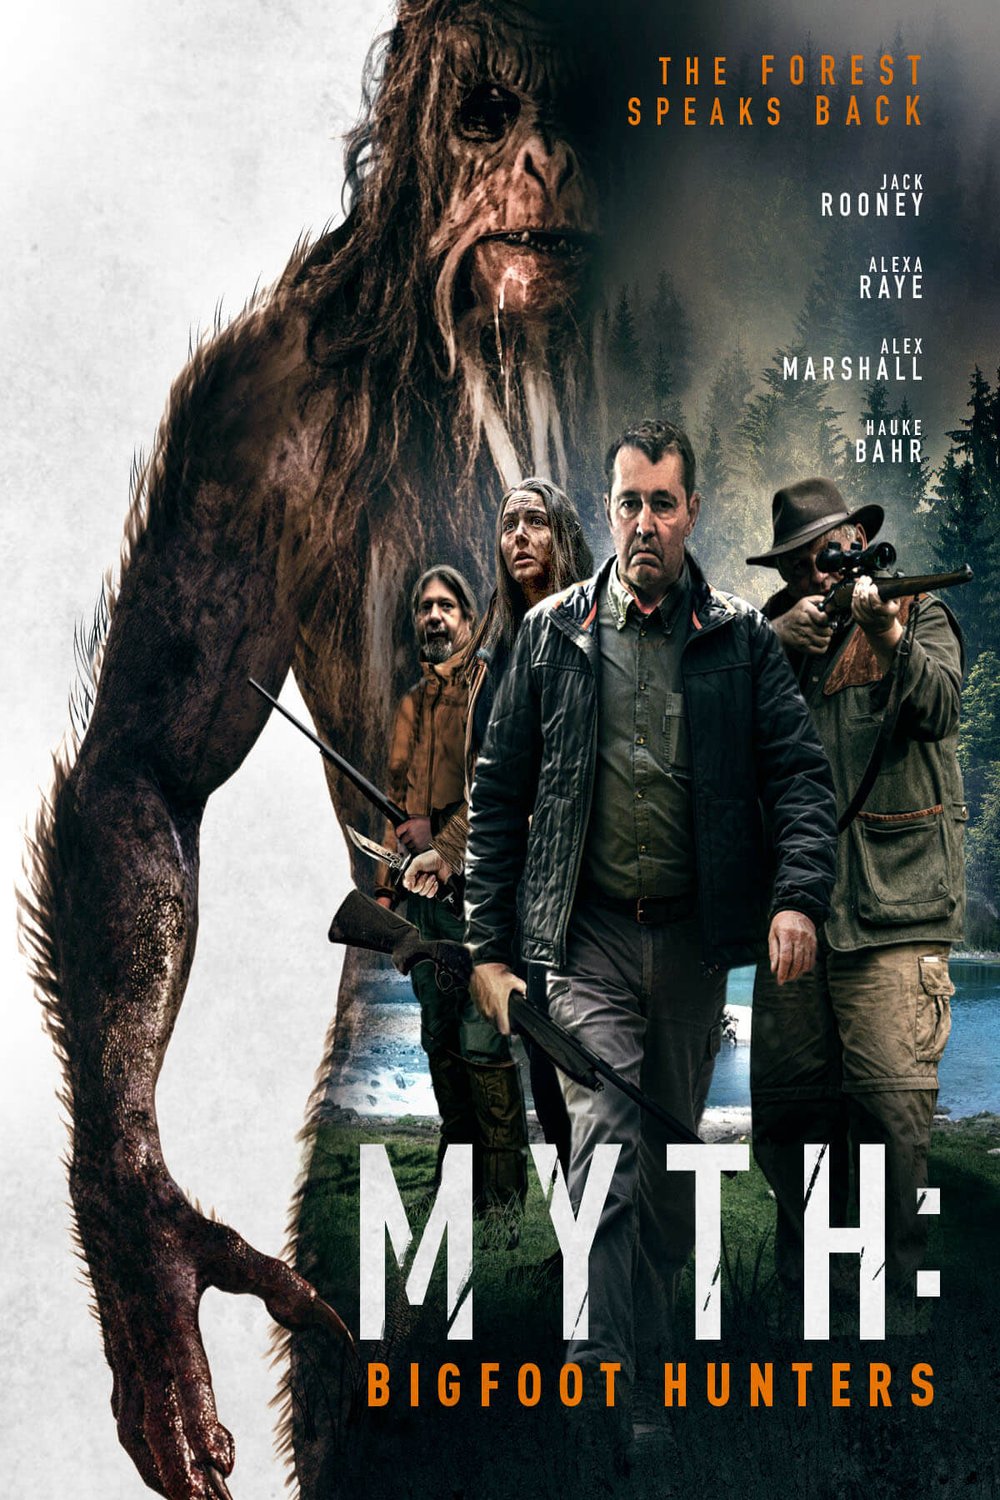 Poster of the movie Myth: Bigfoot Hunters